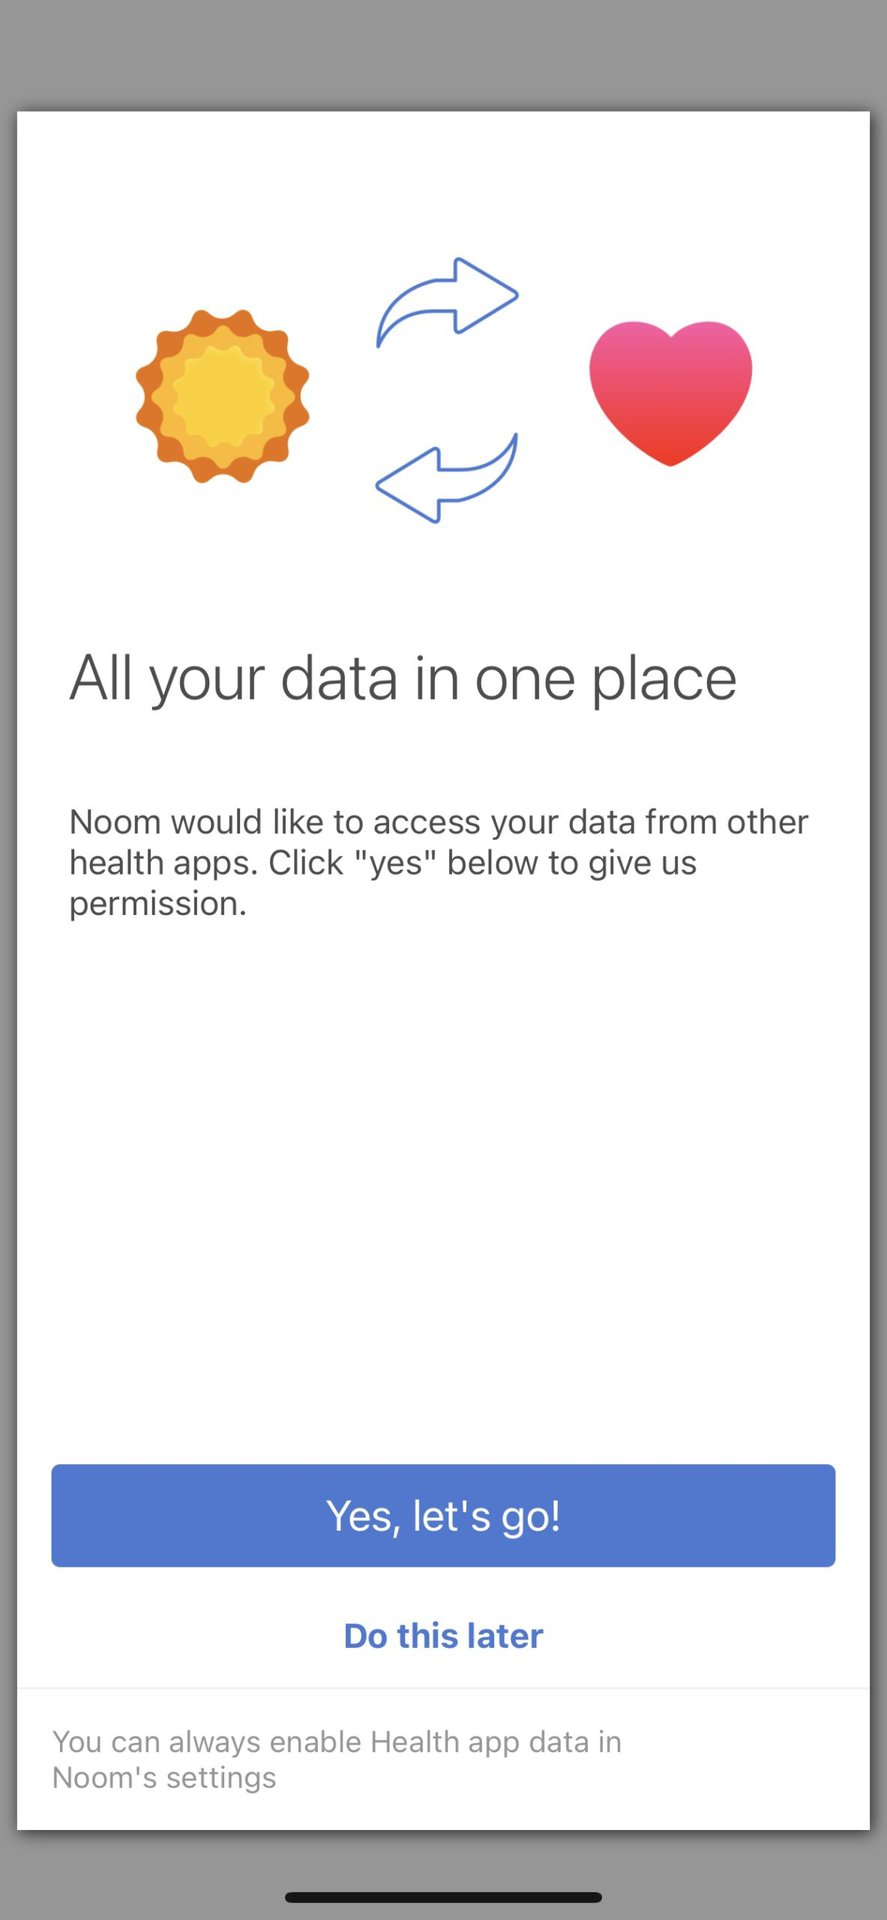 Noom Access Data Yes